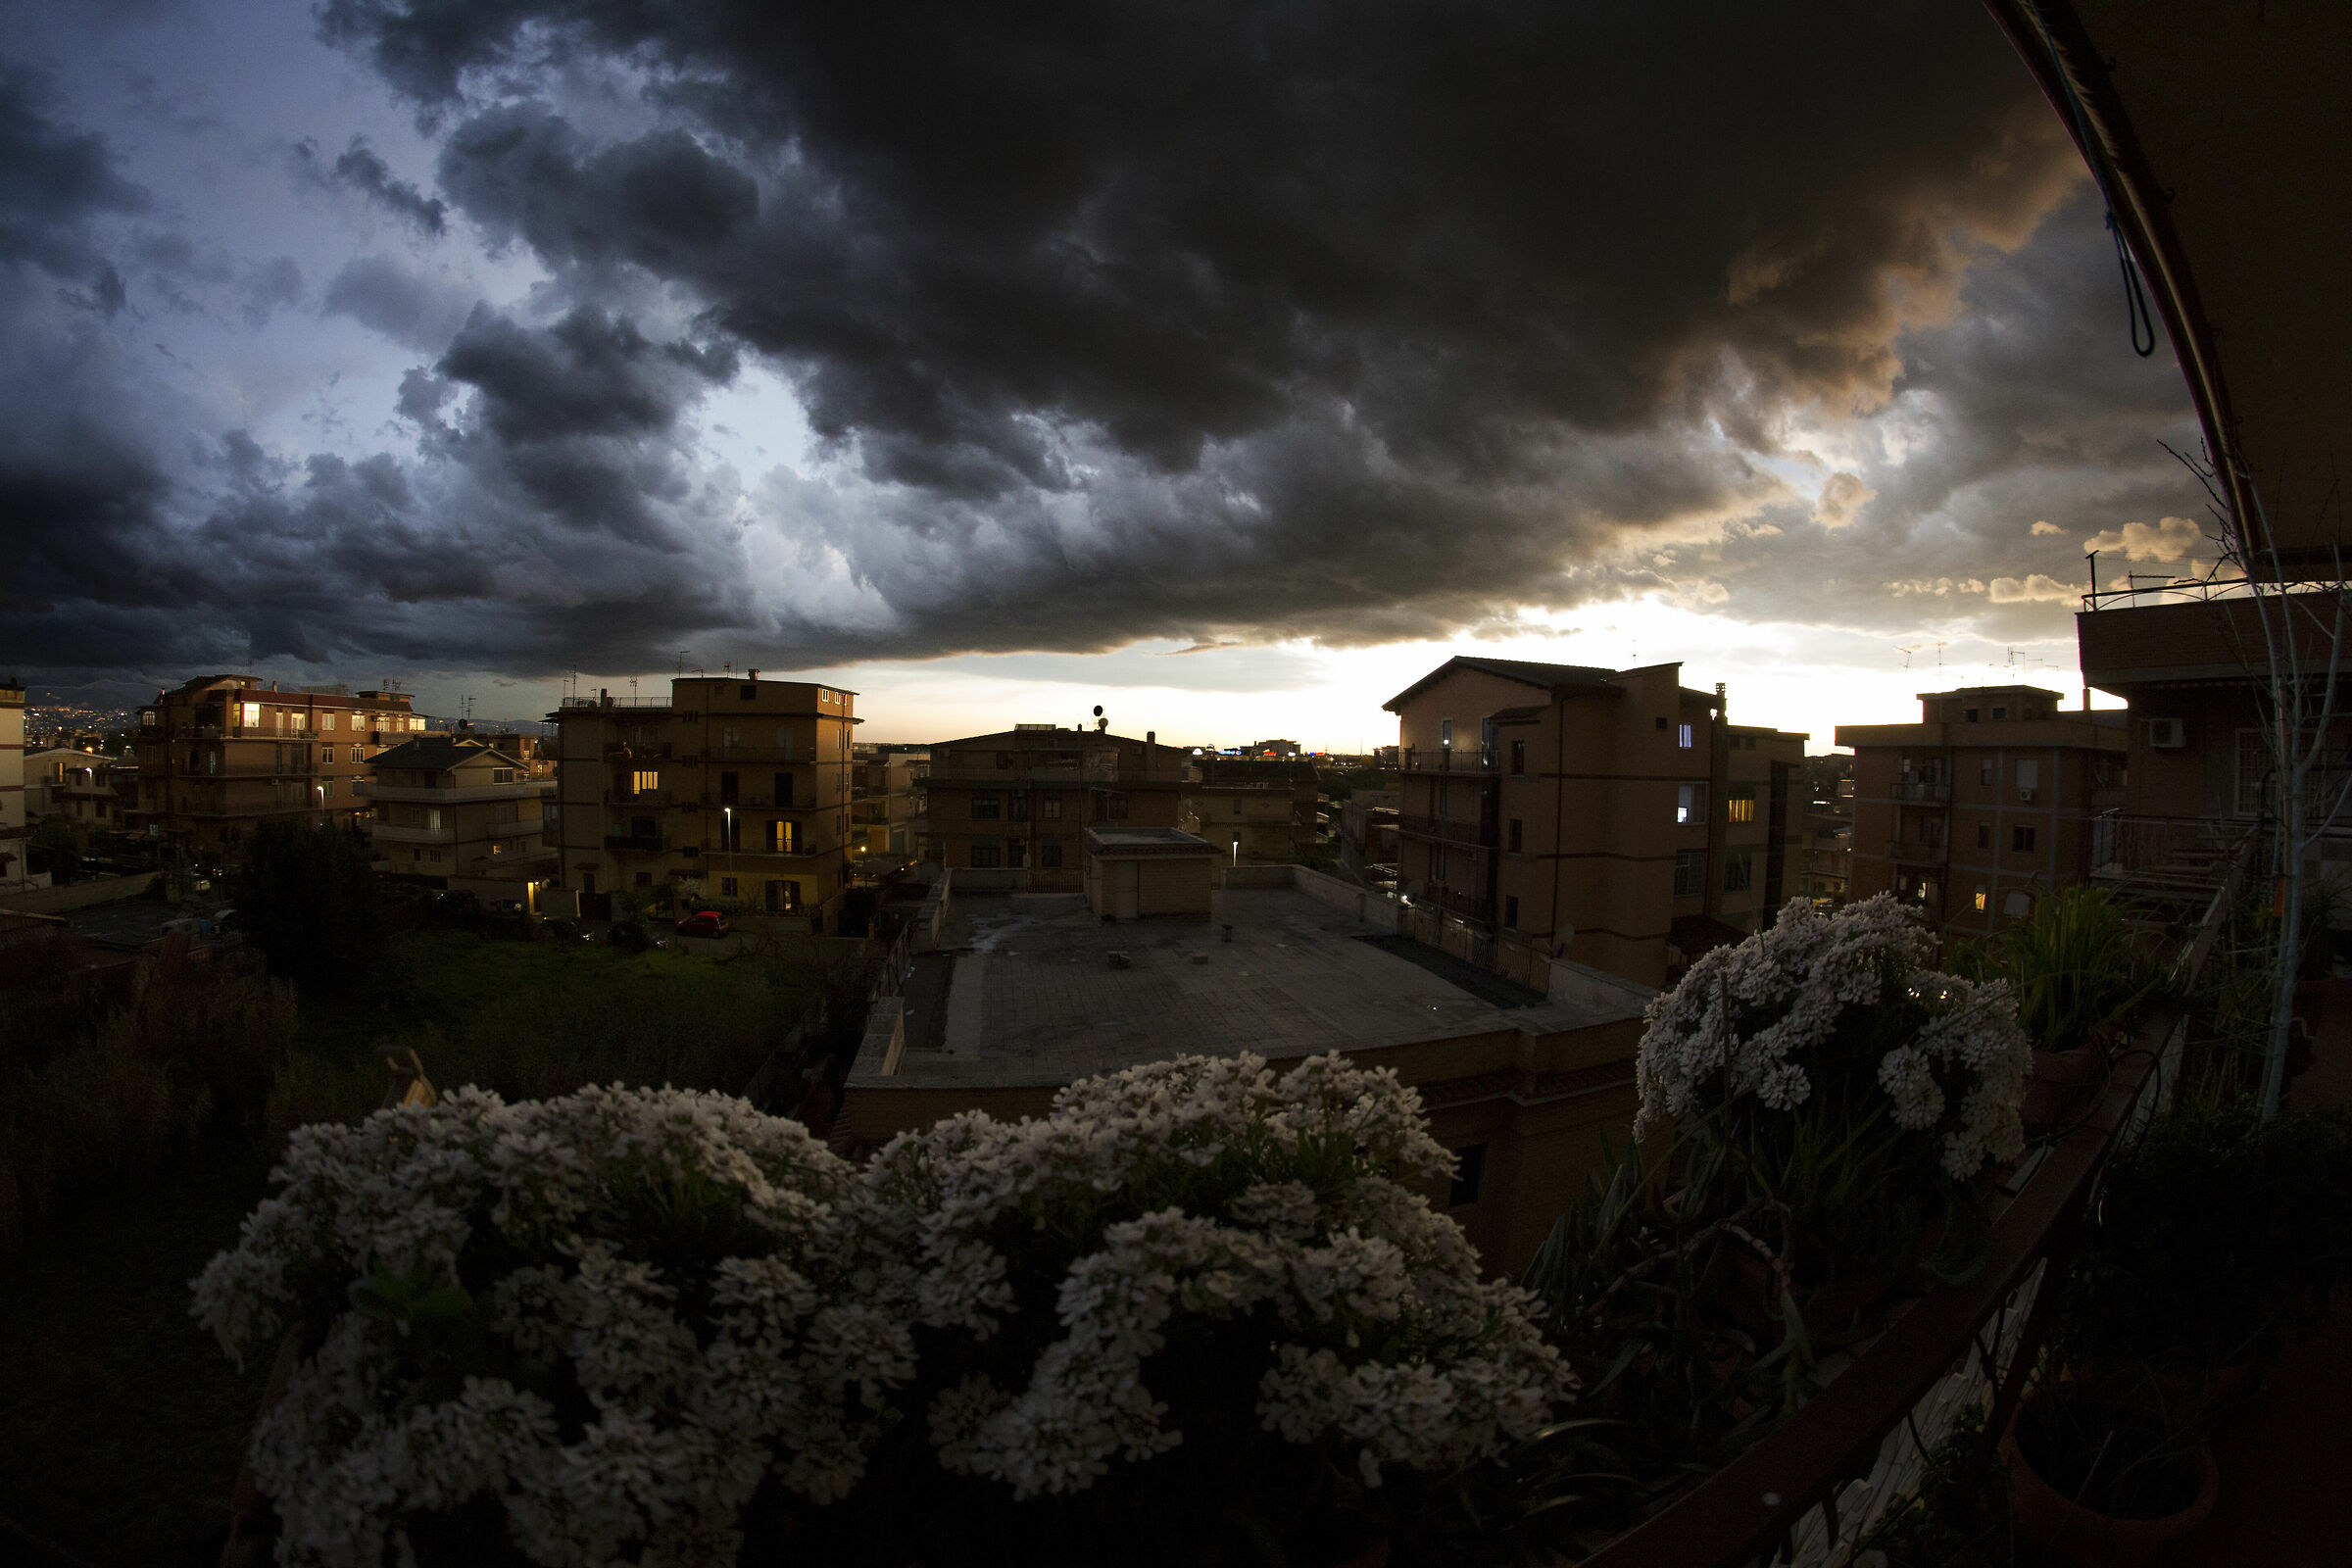 A thunderstorm in Rome...